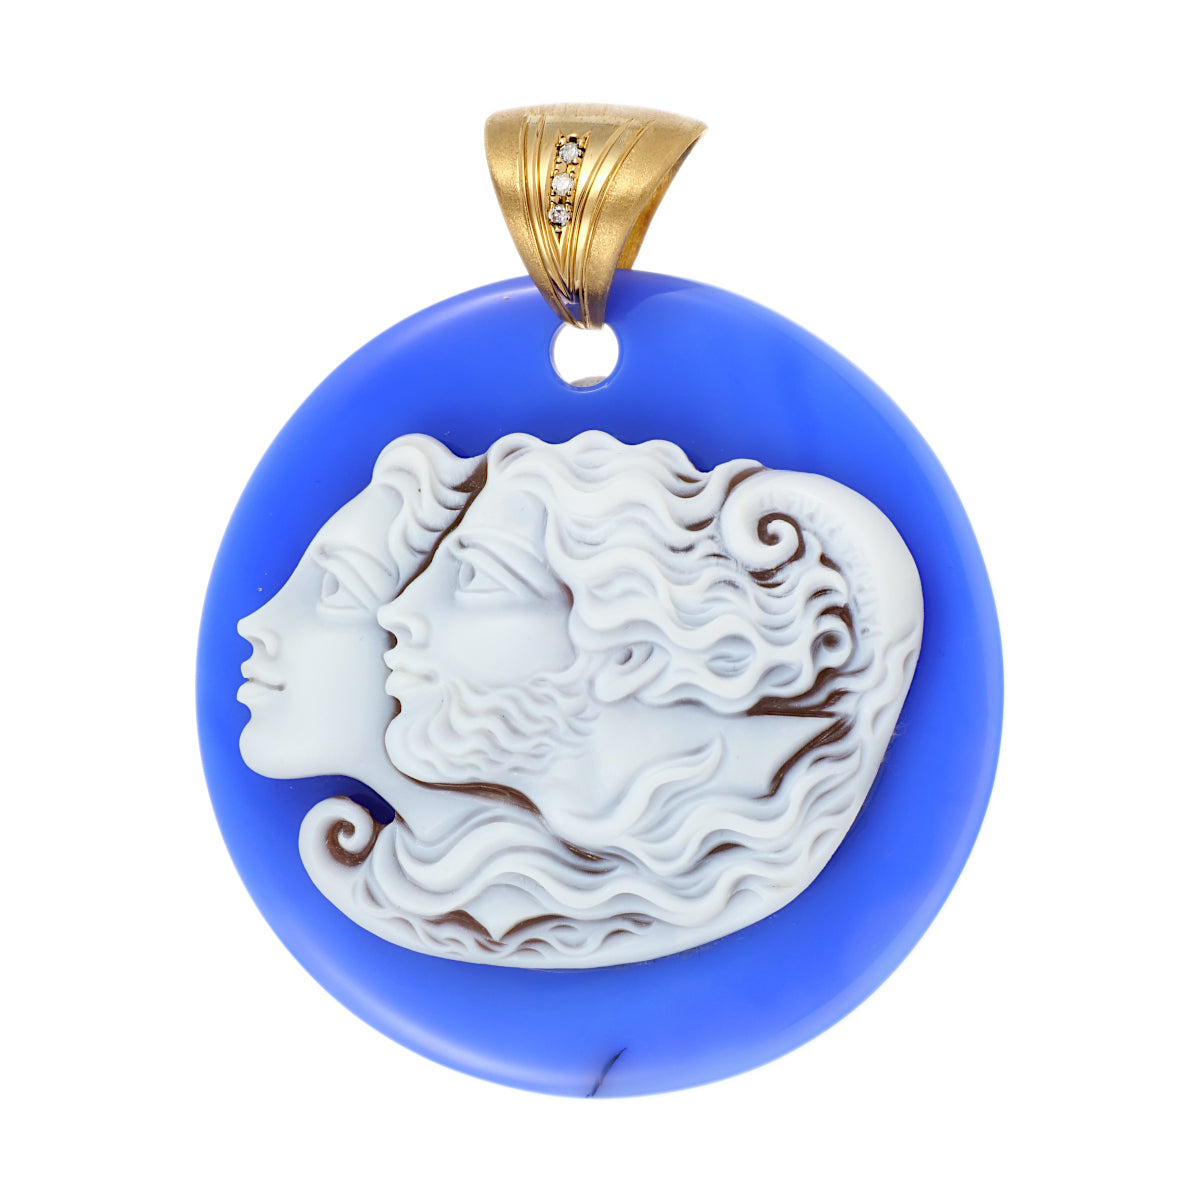 [LuxUness]  PatriziaParlati Cameo with D0.06ct Pendant Top in K18 Gold - Blue Cameo x Diamond, Ladies [Preloved] J1975 in Excellent condition